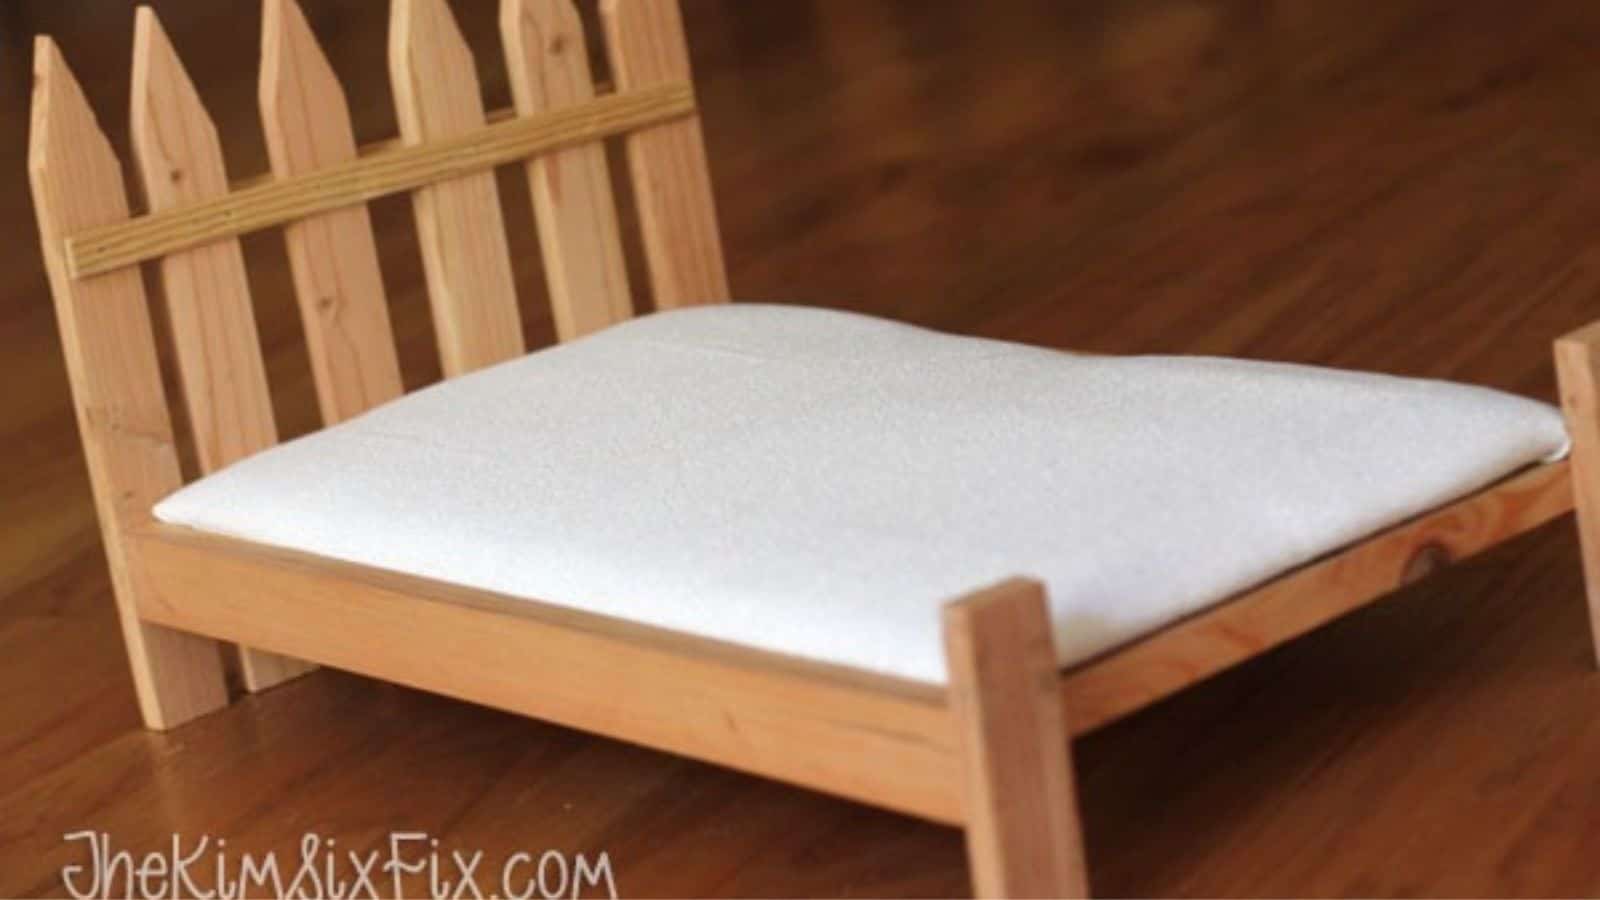 <p>Making a doll bed is an easy kid’s woodworking project idea. This one is made from survey stakes and 2X2s. The simple design is perfect for dolls up to 21″. Your kids will appreciate a toy they helped to make. <a href="https://www.thekimsixfix.com/2015/06/easy-diy-picket-fence-doll-bed.html" rel="noreferrer noopener">See how to make this doll bed.</a></p>